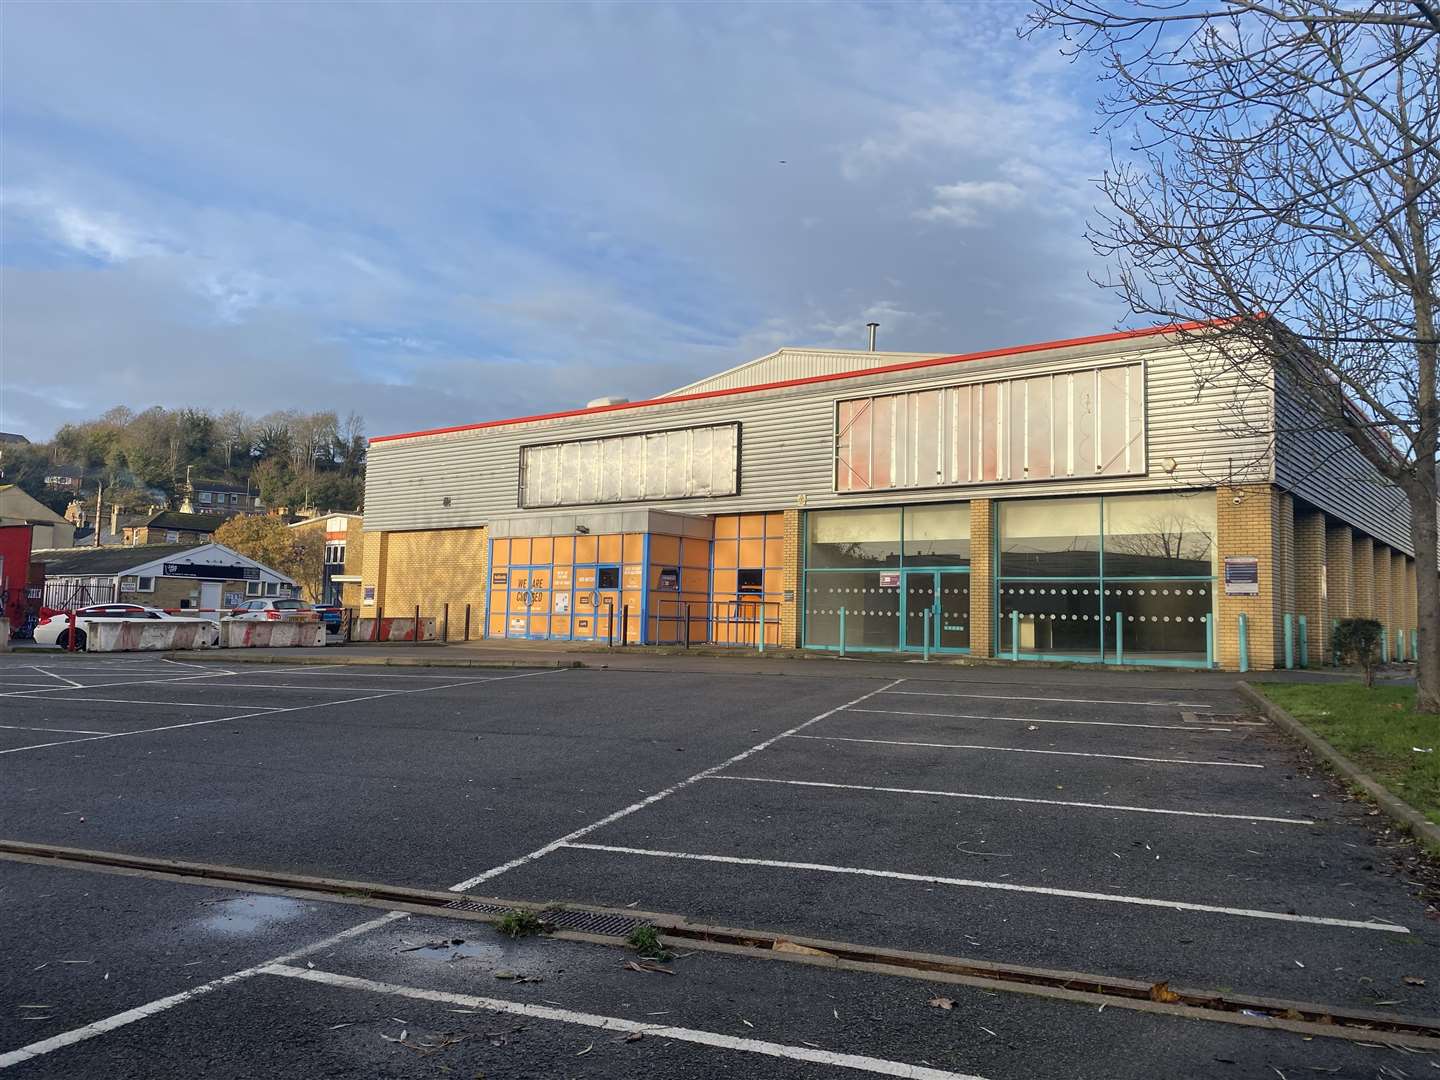 Dover's former Halfords is set to become the town's first PureGym